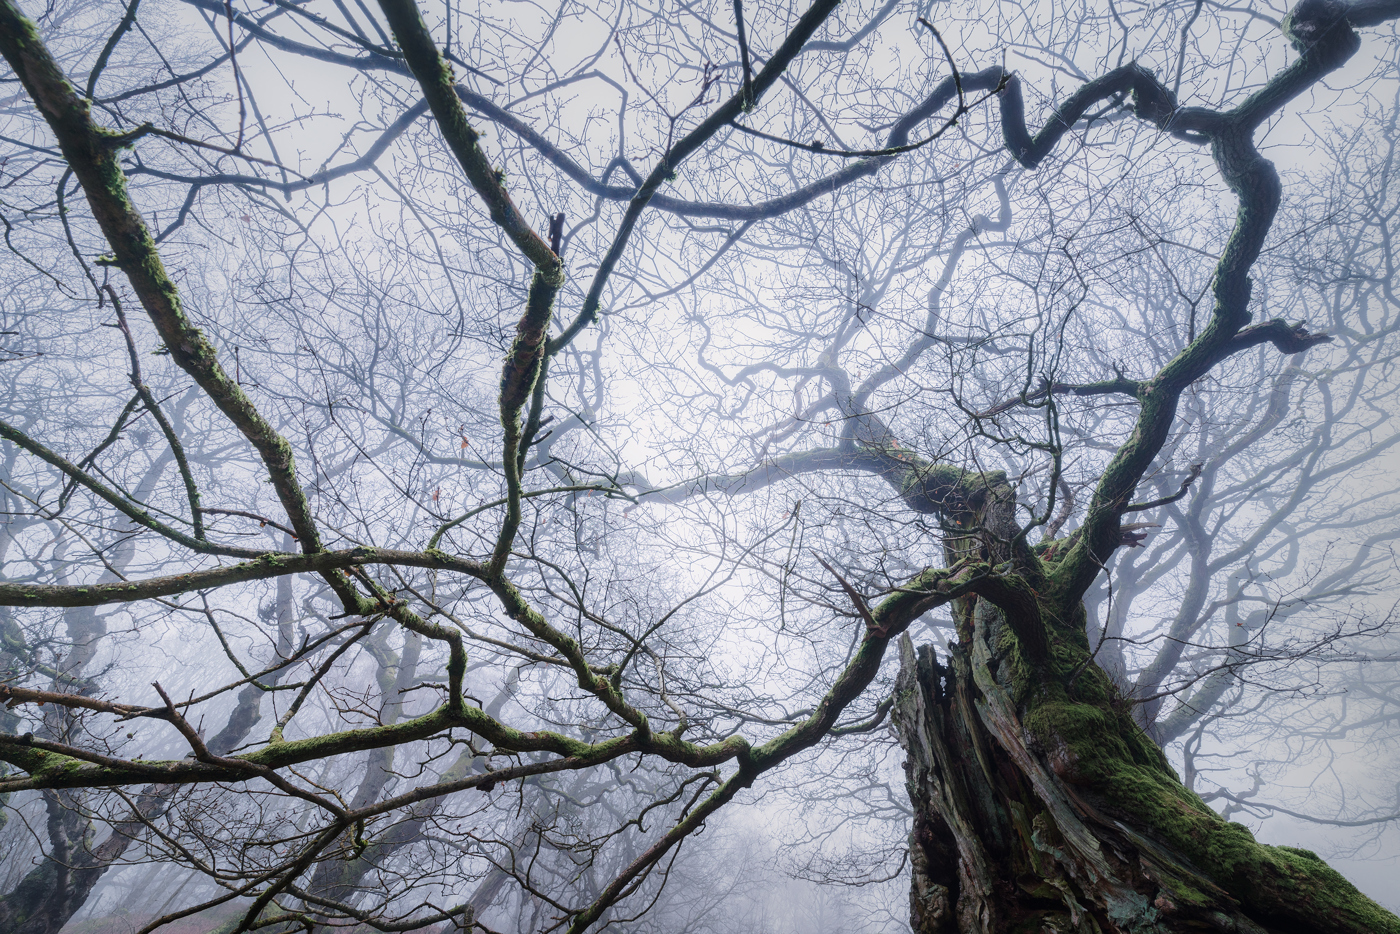 A large oak tree of an ancient woodland, shrouded in mist. Knotted branches, draped with moss, stretch across the sky, framing a web of bare twigs. The venerable trunks and limbs tell tales of centuries past, standing as silent sentinels in this serene setting.